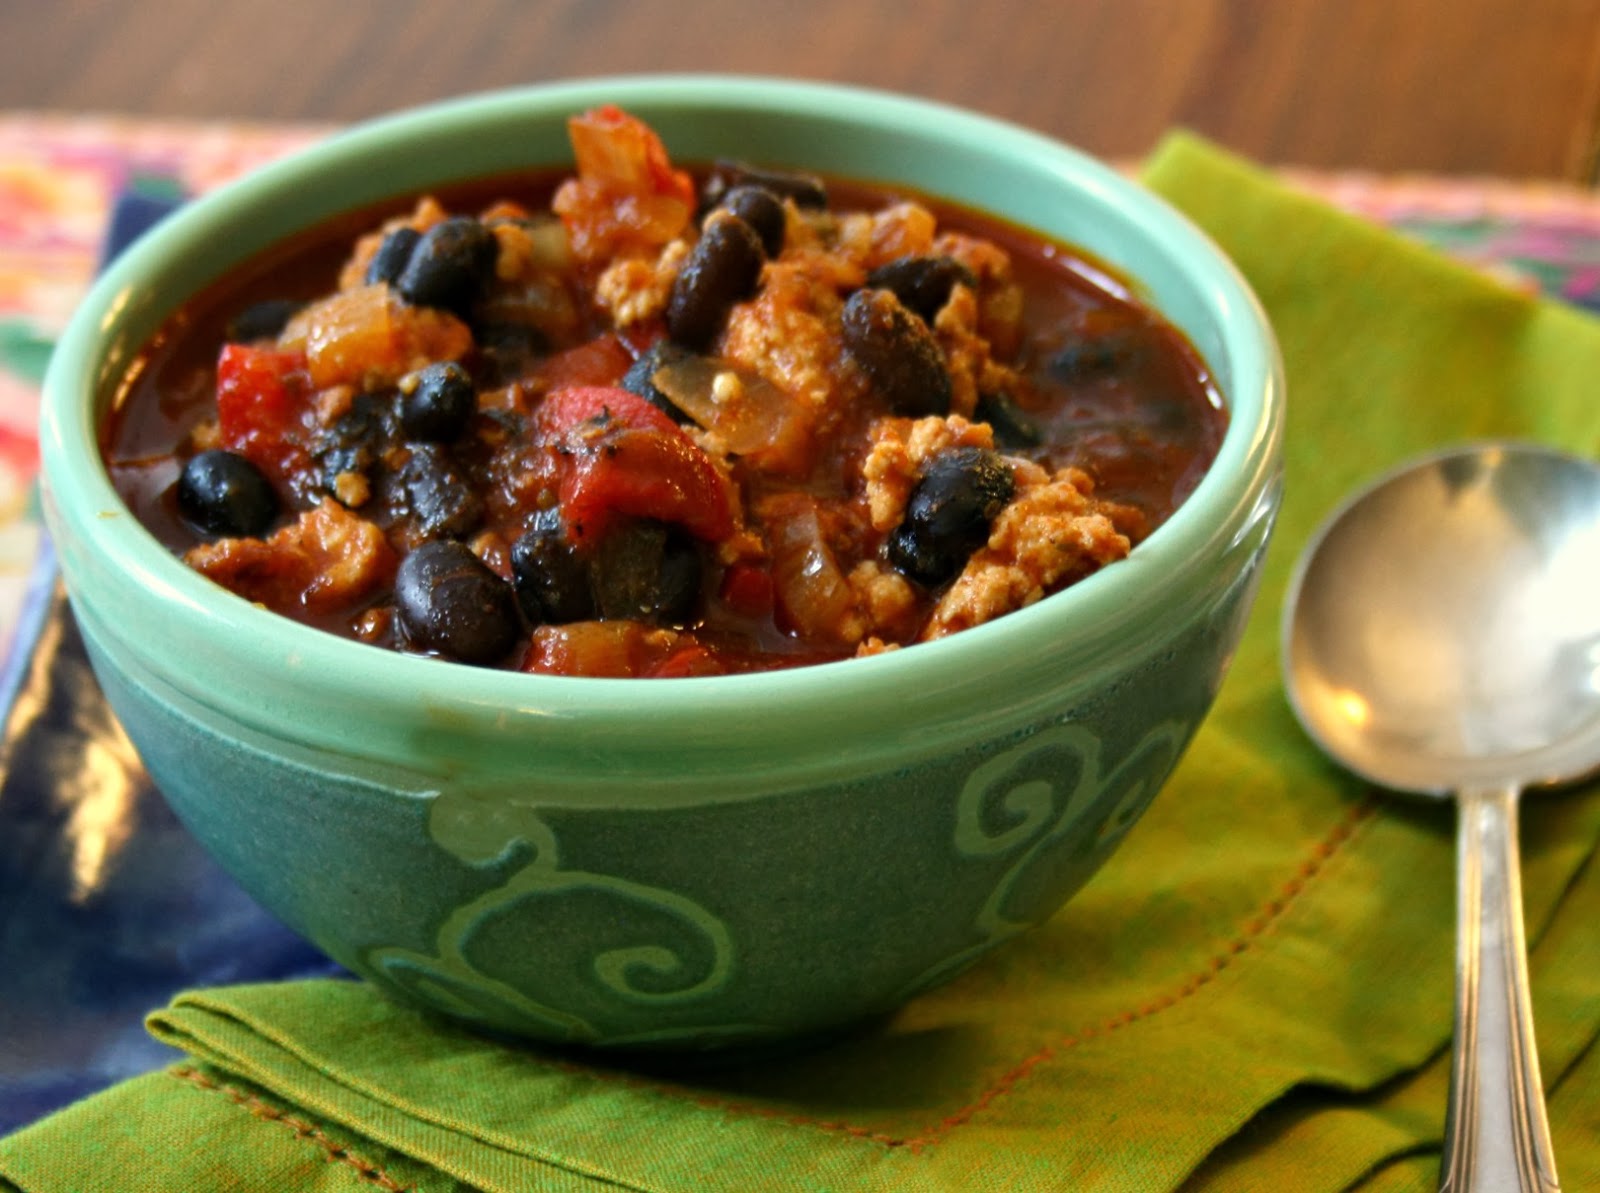 Black bean turkey chili is wholesome and flavourful.